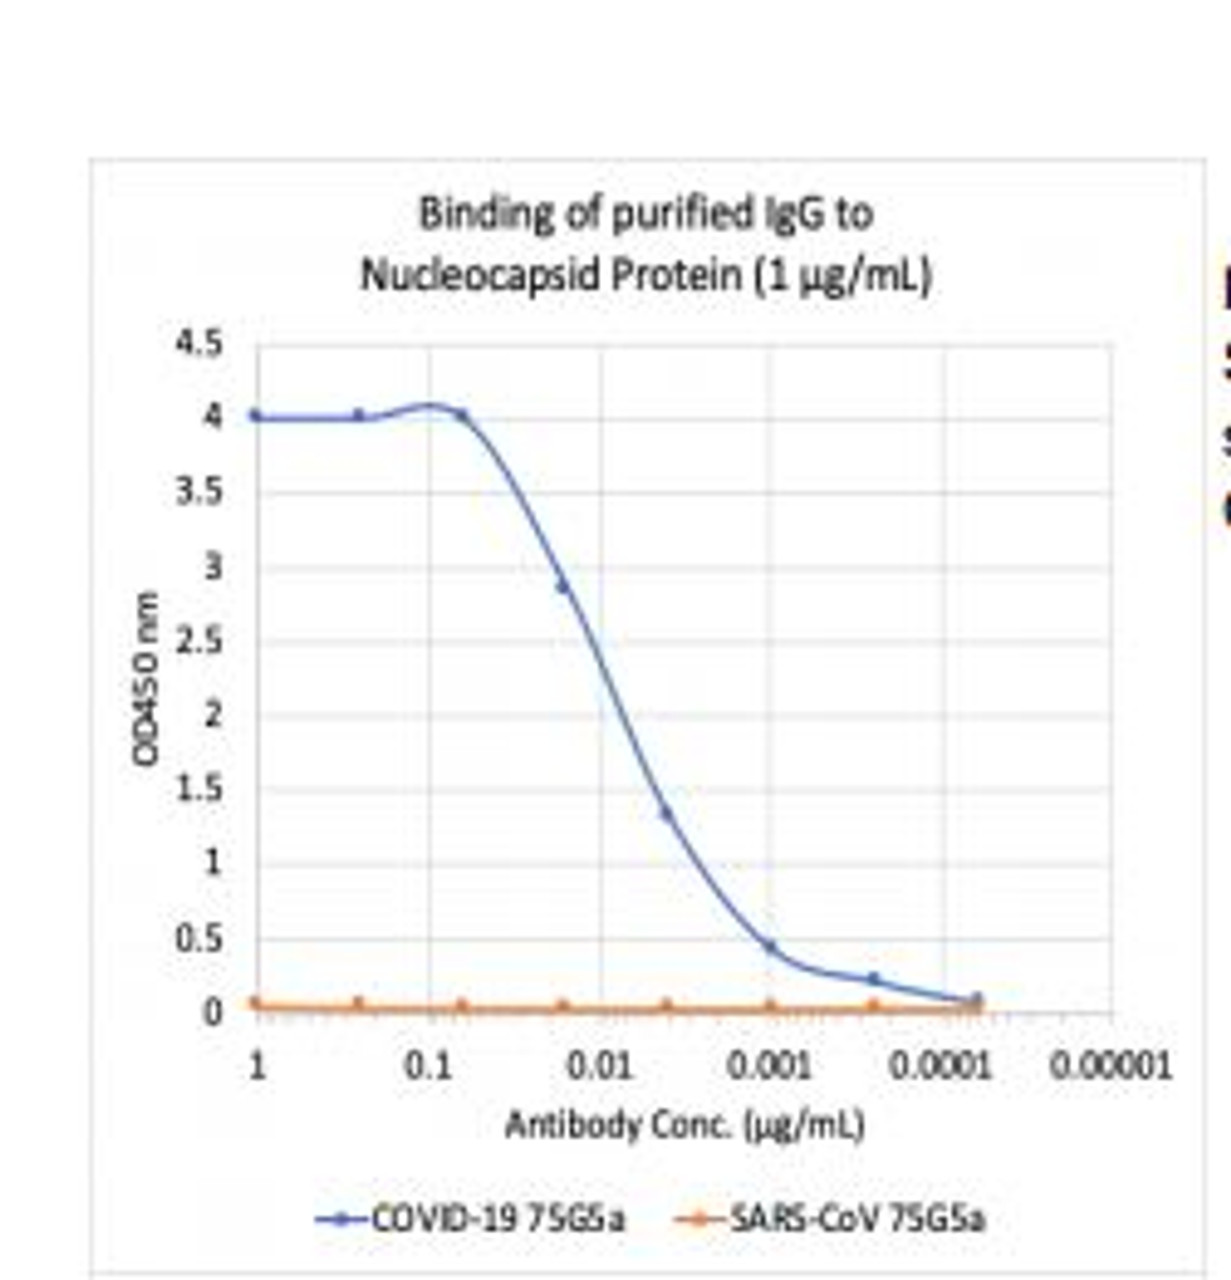 Microtiter wells were coated with SARS-CoV-2 (COVID-19) Nucleocapsid Protein (NP) and SARS-CoV NP at 1 ug/mL. Purified rabbit monoclonal antibody 75G5a was
serially diluted 1:2 starting at 1 ug/mL, and shows very strong and specific binding to COVID-19 NP antigen, with no significant cross-reactivity to SARS-CoV NP antigen.